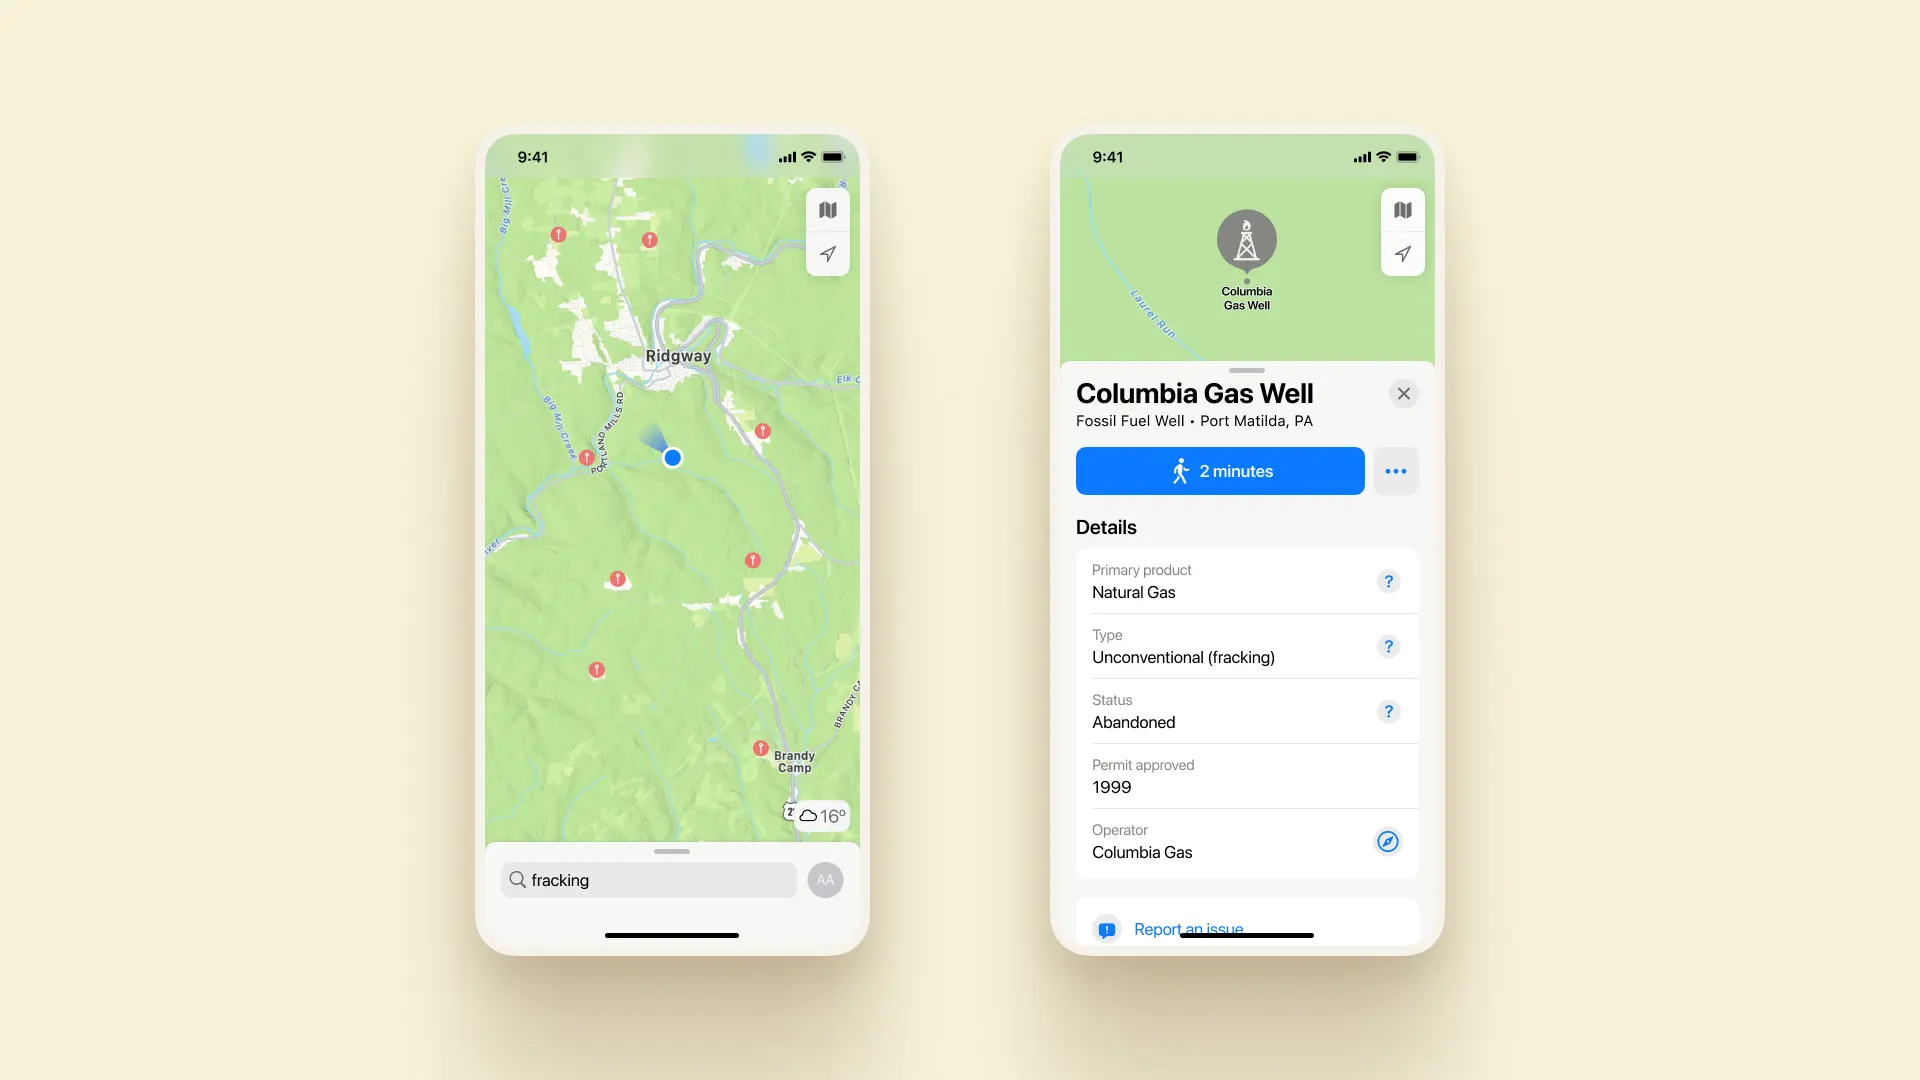 Design mockup of iPhone screens of Apple Maps searching for fracking